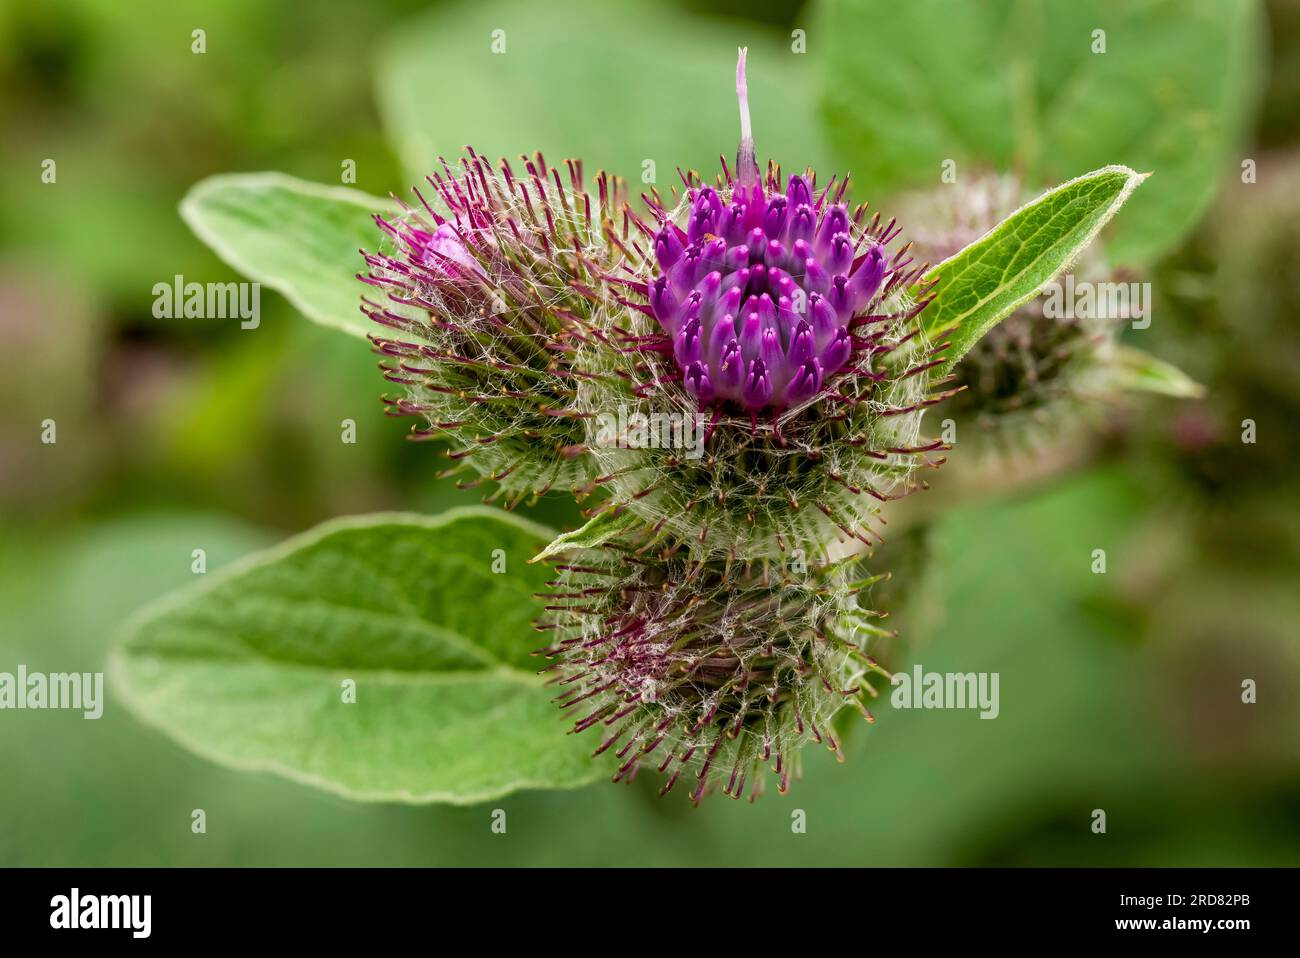 Macro photo of the inflorescence of a lesser burdock (Arctium minus), one of the purple flowers is beginning to bloom Stock Photo